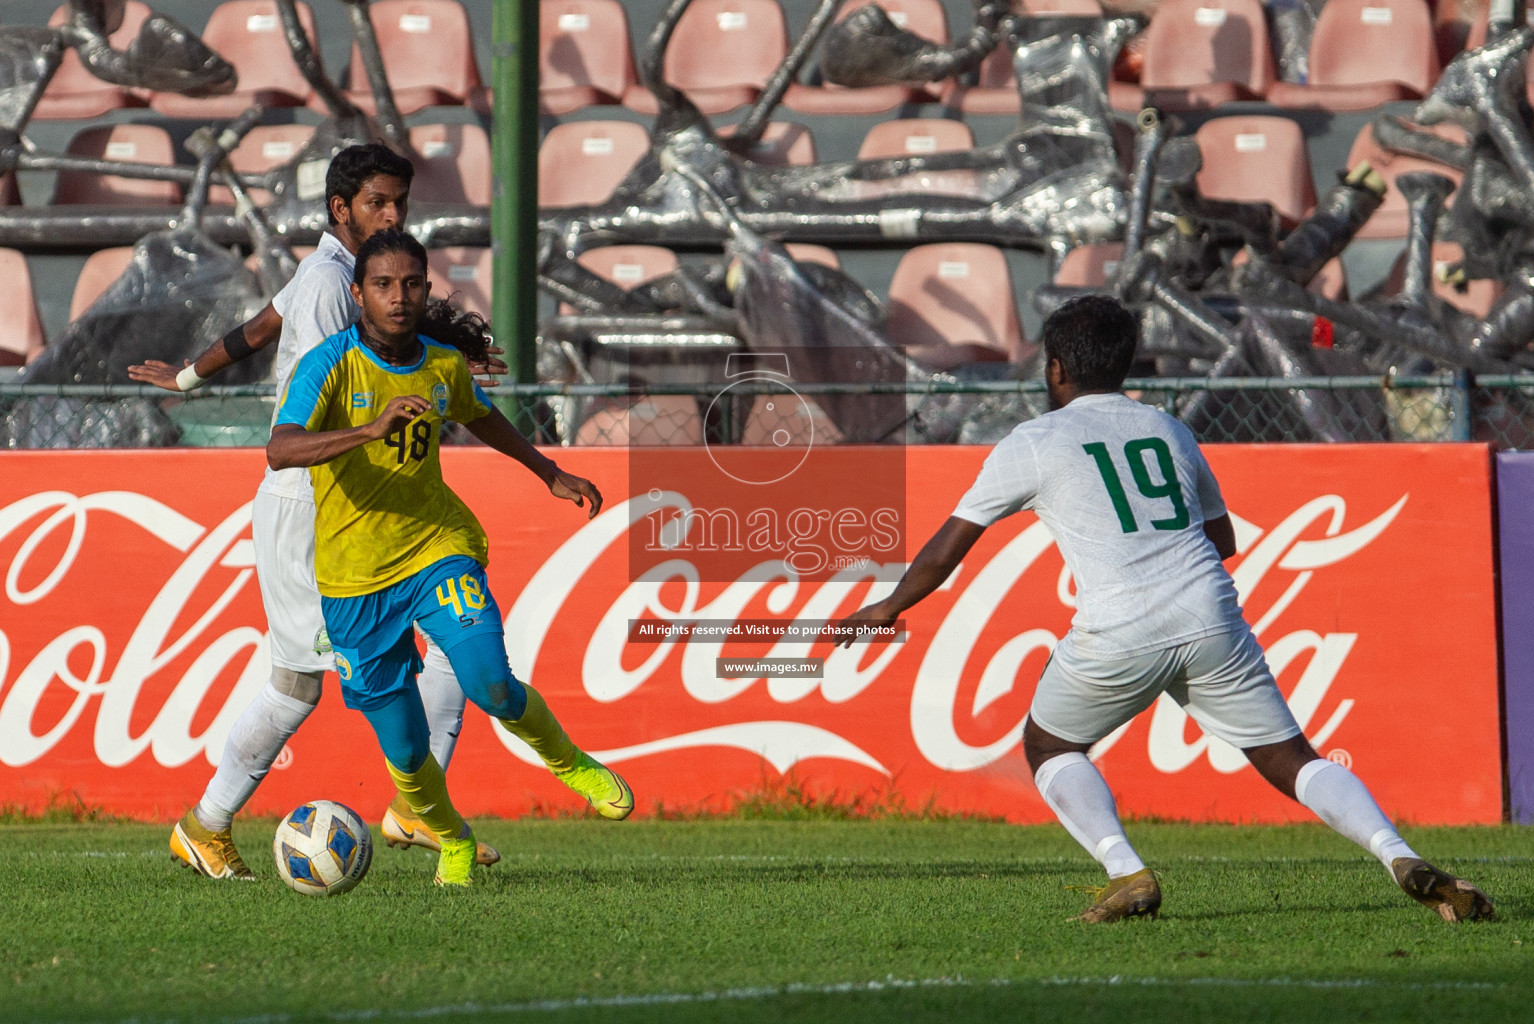 Club Valencia vs Club Green Streets in Ooredoo Dhivehi Premier League 2021/22 on 12th July 2022, held in National Football Stadium, Male', Maldives Photos: Maanish/ Images mv